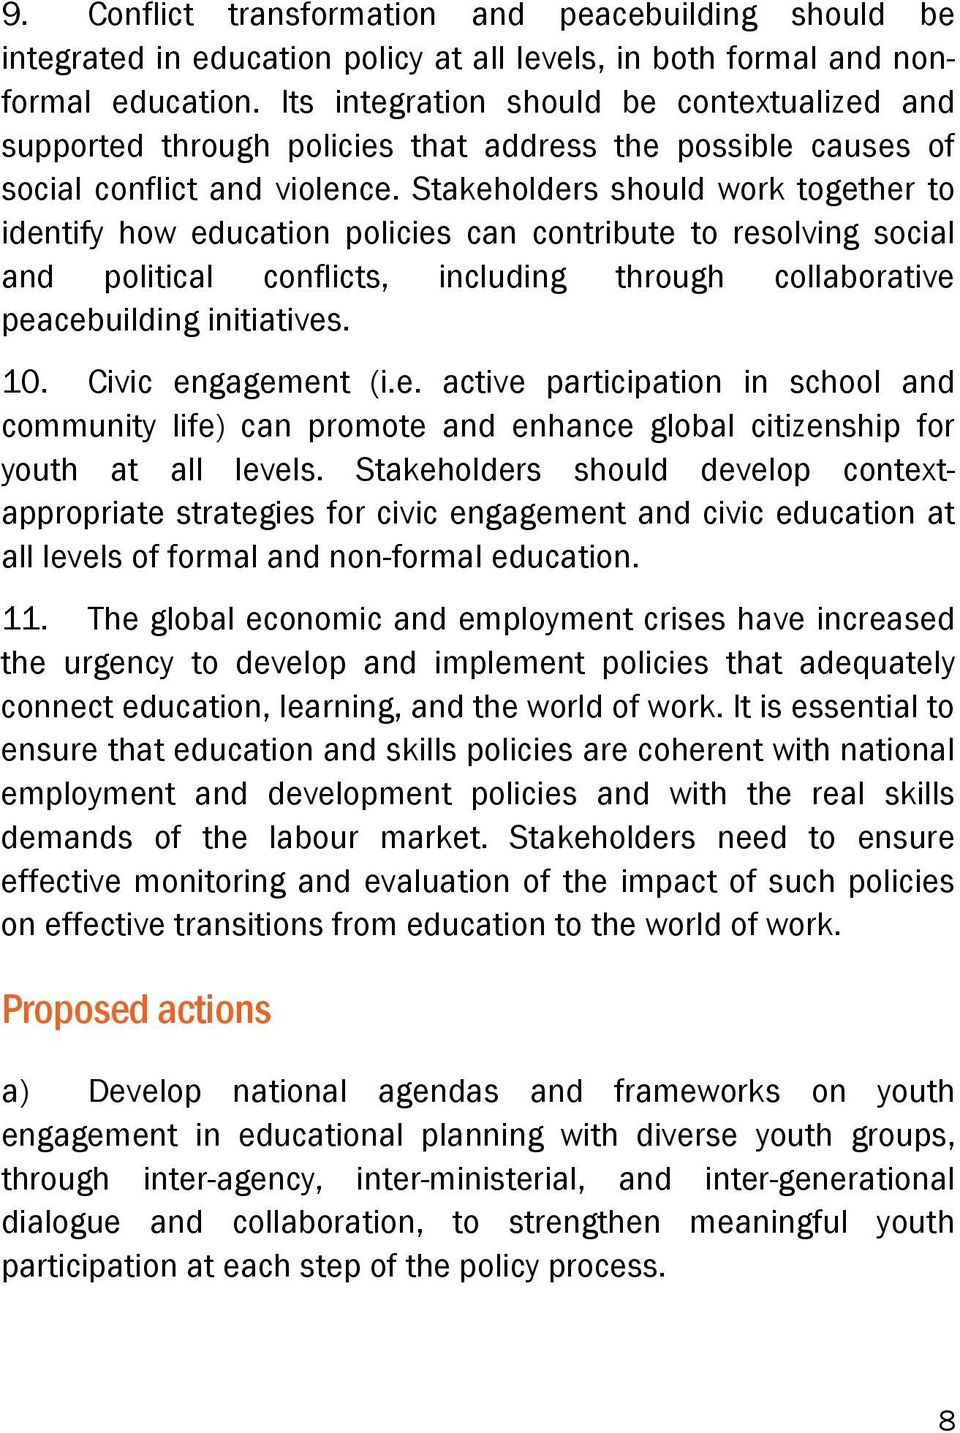 Stakeholders should work together to identify how education policies can contribute to resolving social and political conflicts, including through collaborative peacebuilding initiatives. 10.